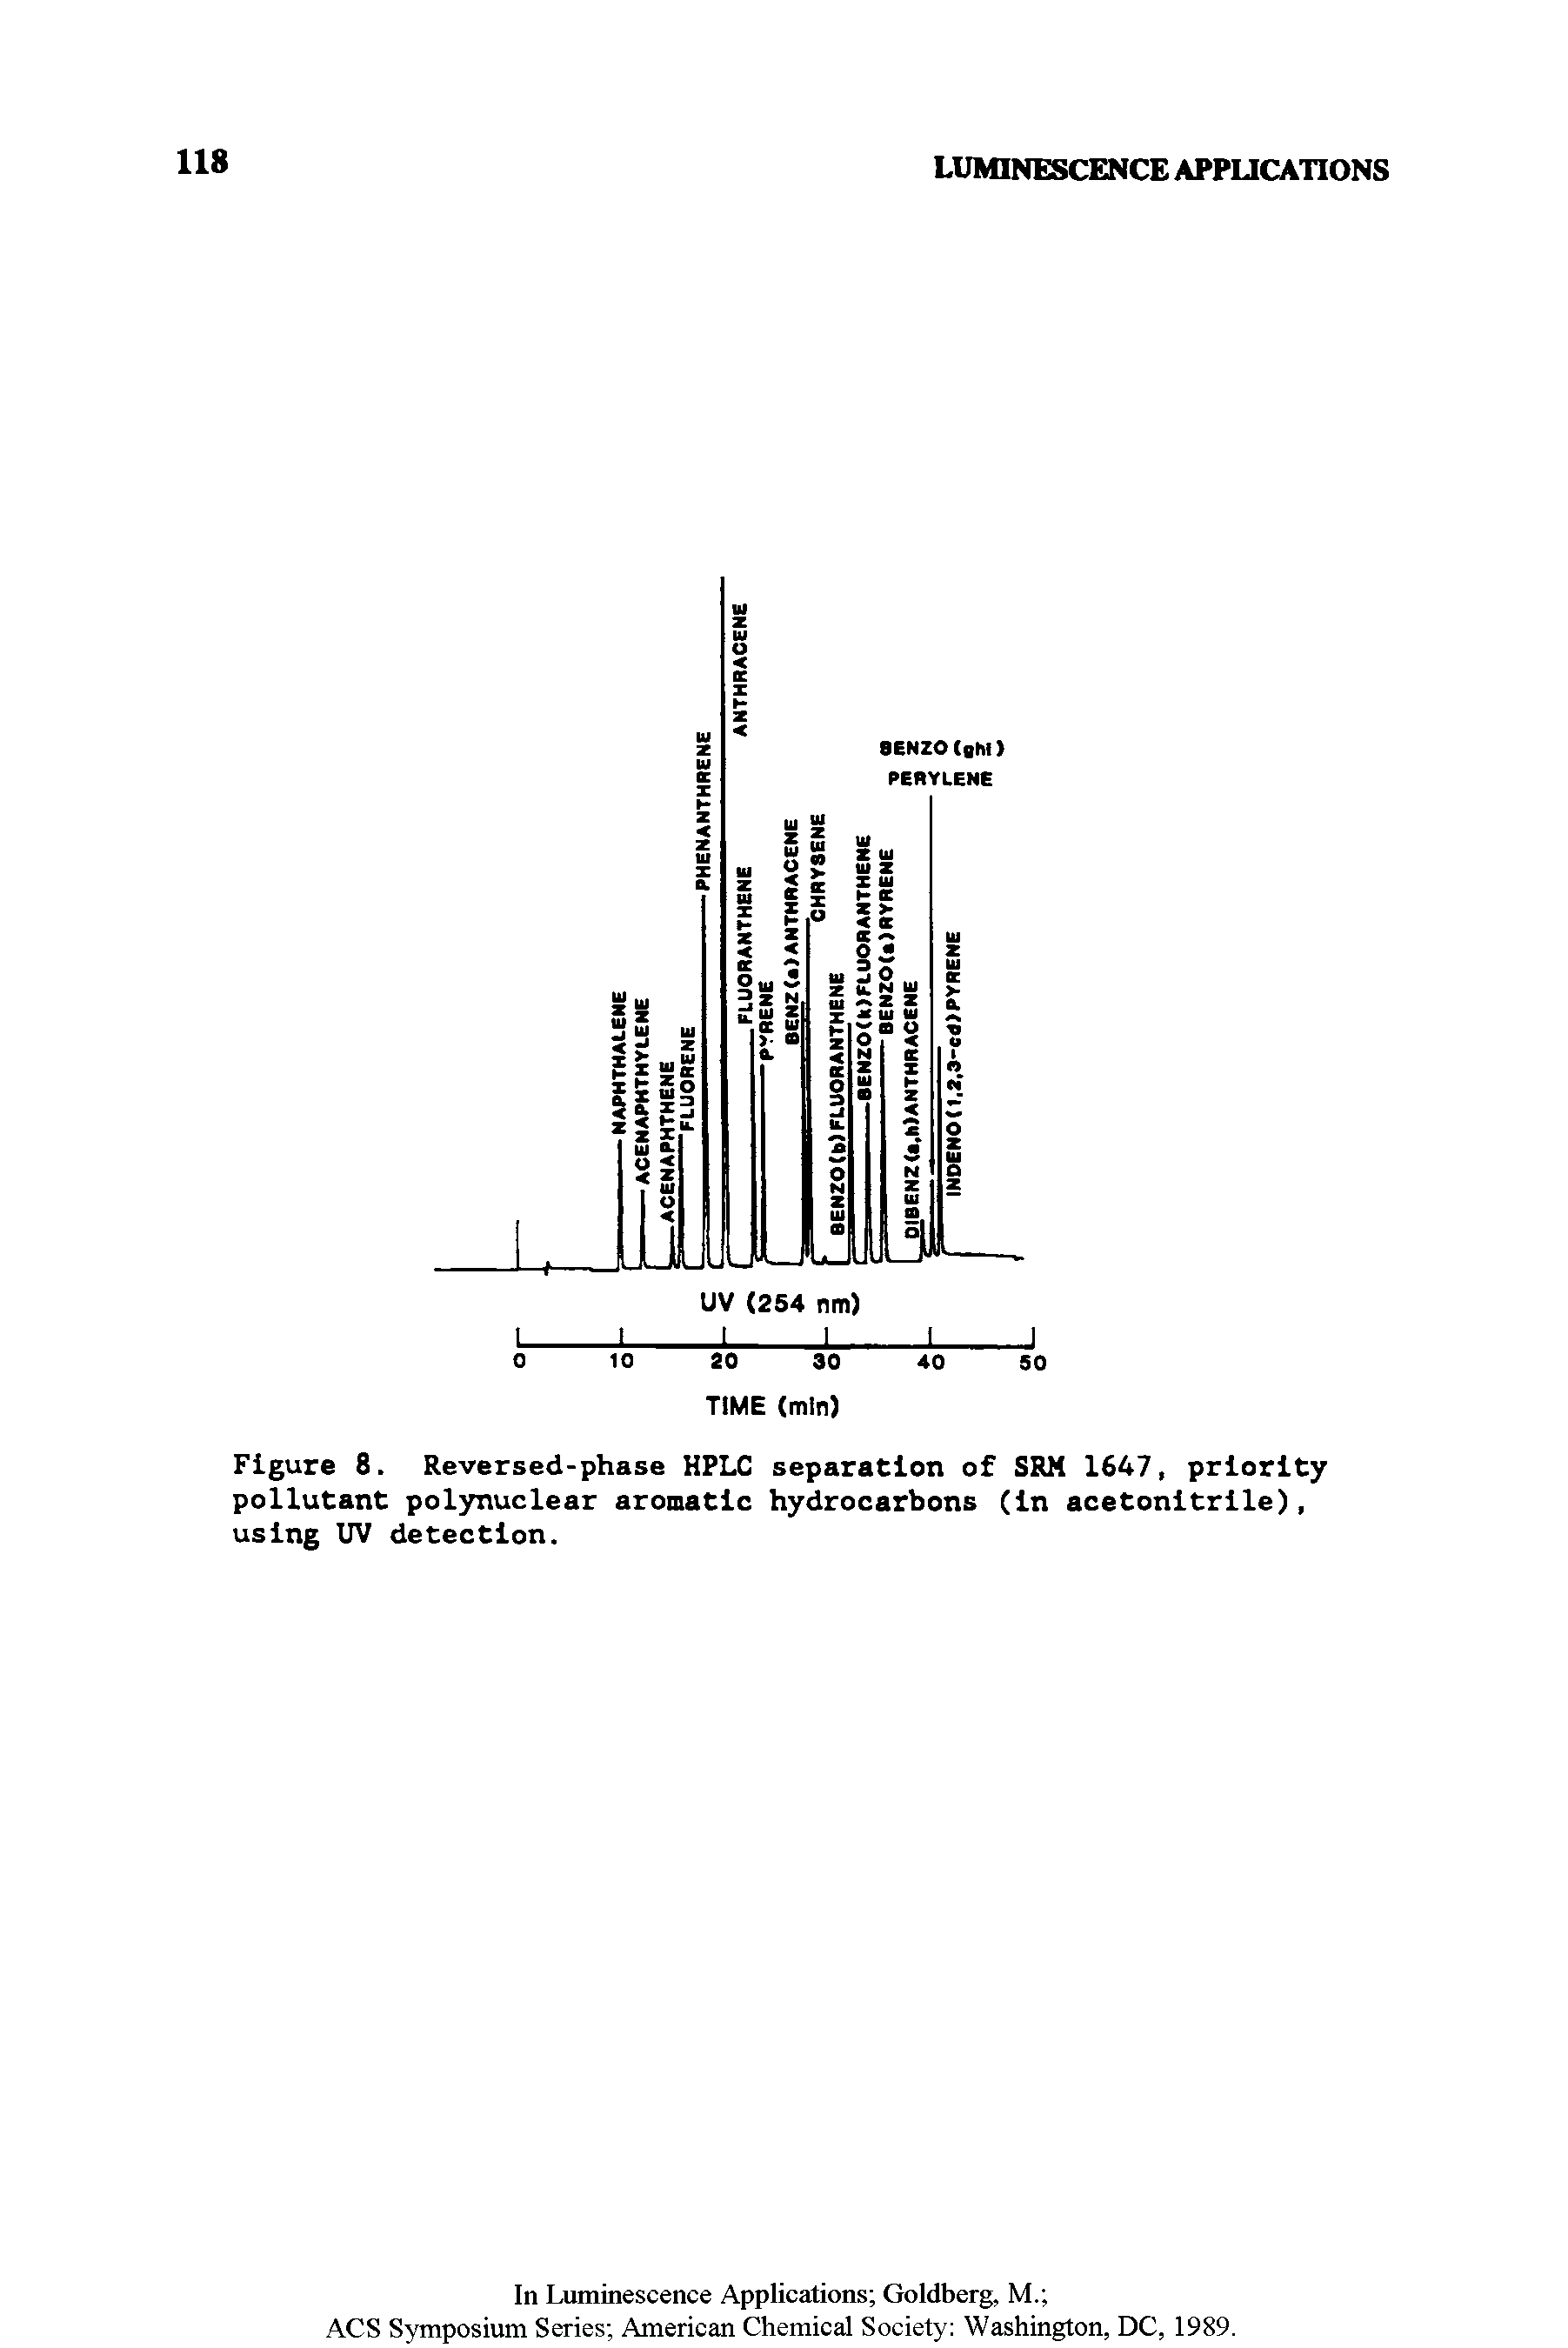 Figure 8. Reversed-phase HPLC separation of SRM 1647, priority pollutant polynuclear aromatic hydrocarbons (In acetonitrile), using UV detection.